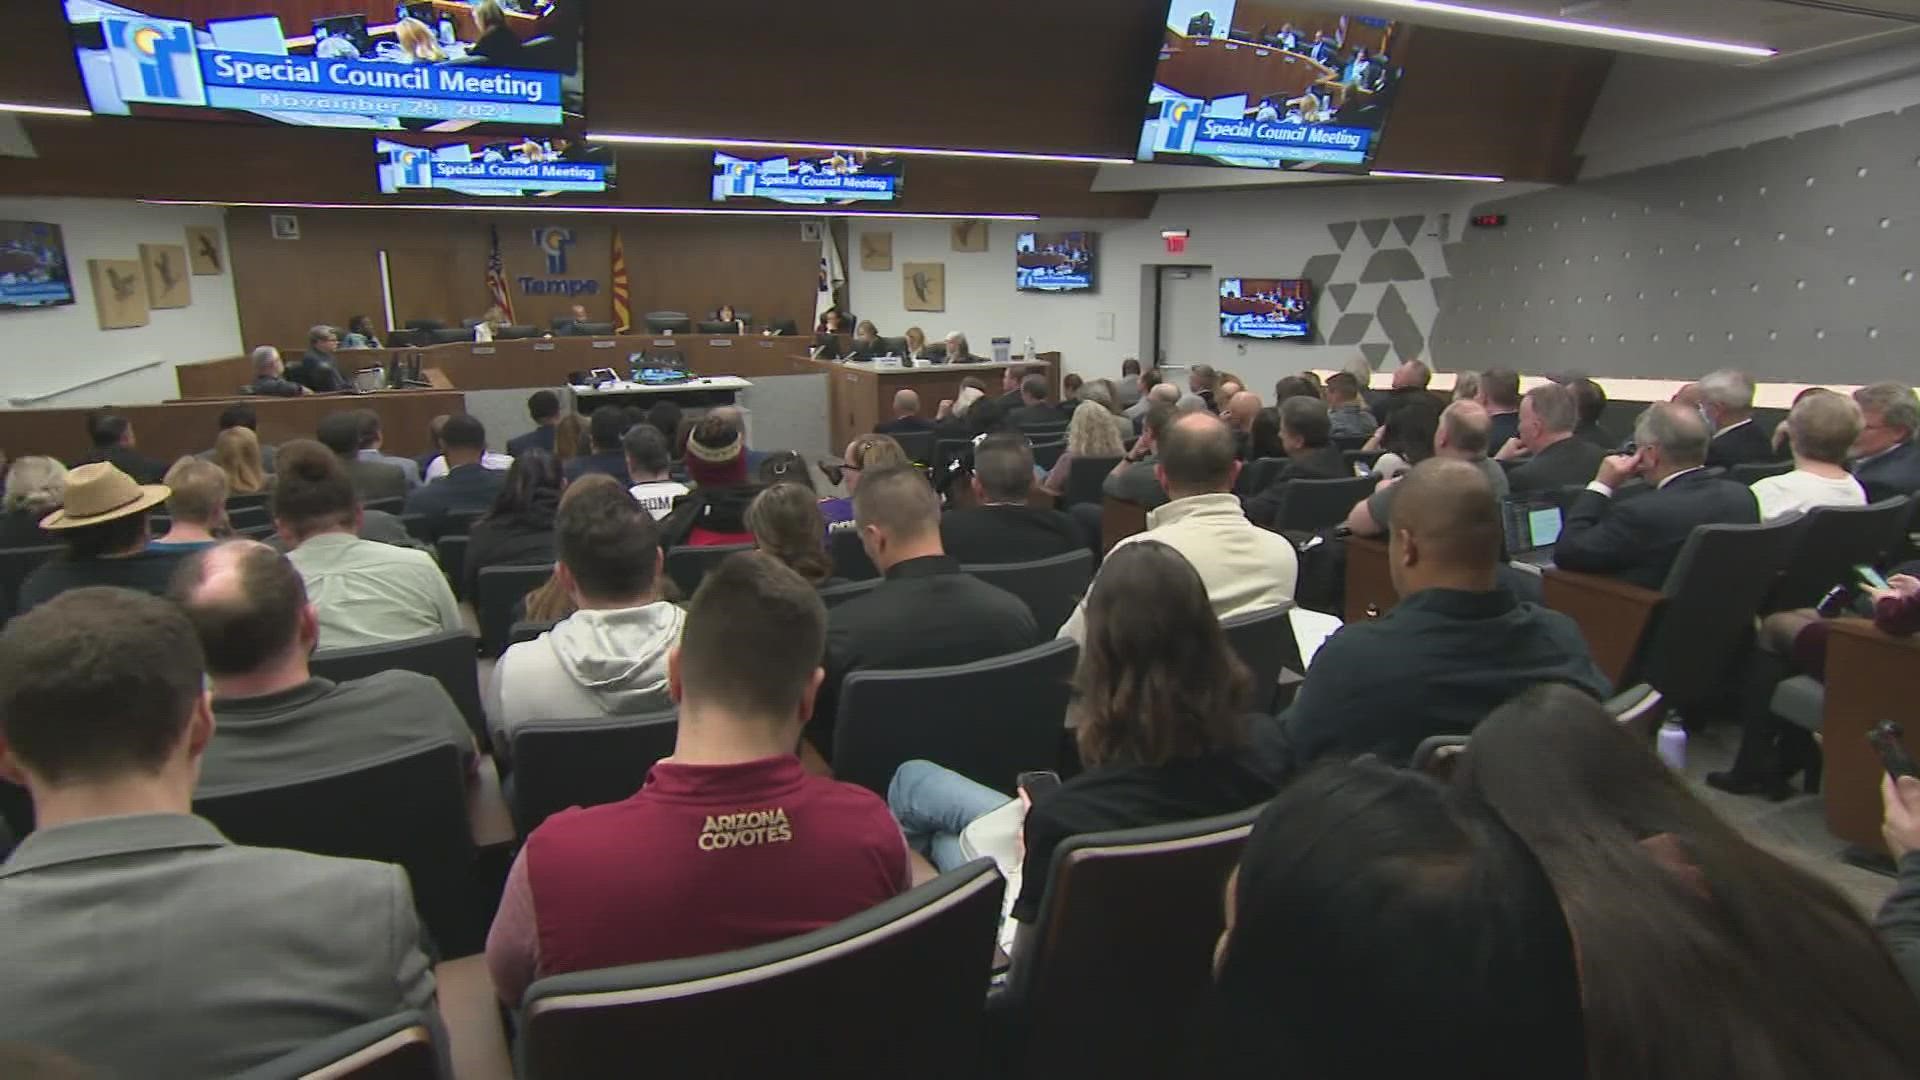 Out of the nearly 40 people who spoke during this council session, half said they were for it, and the other half said this would bring problems to Tempe.